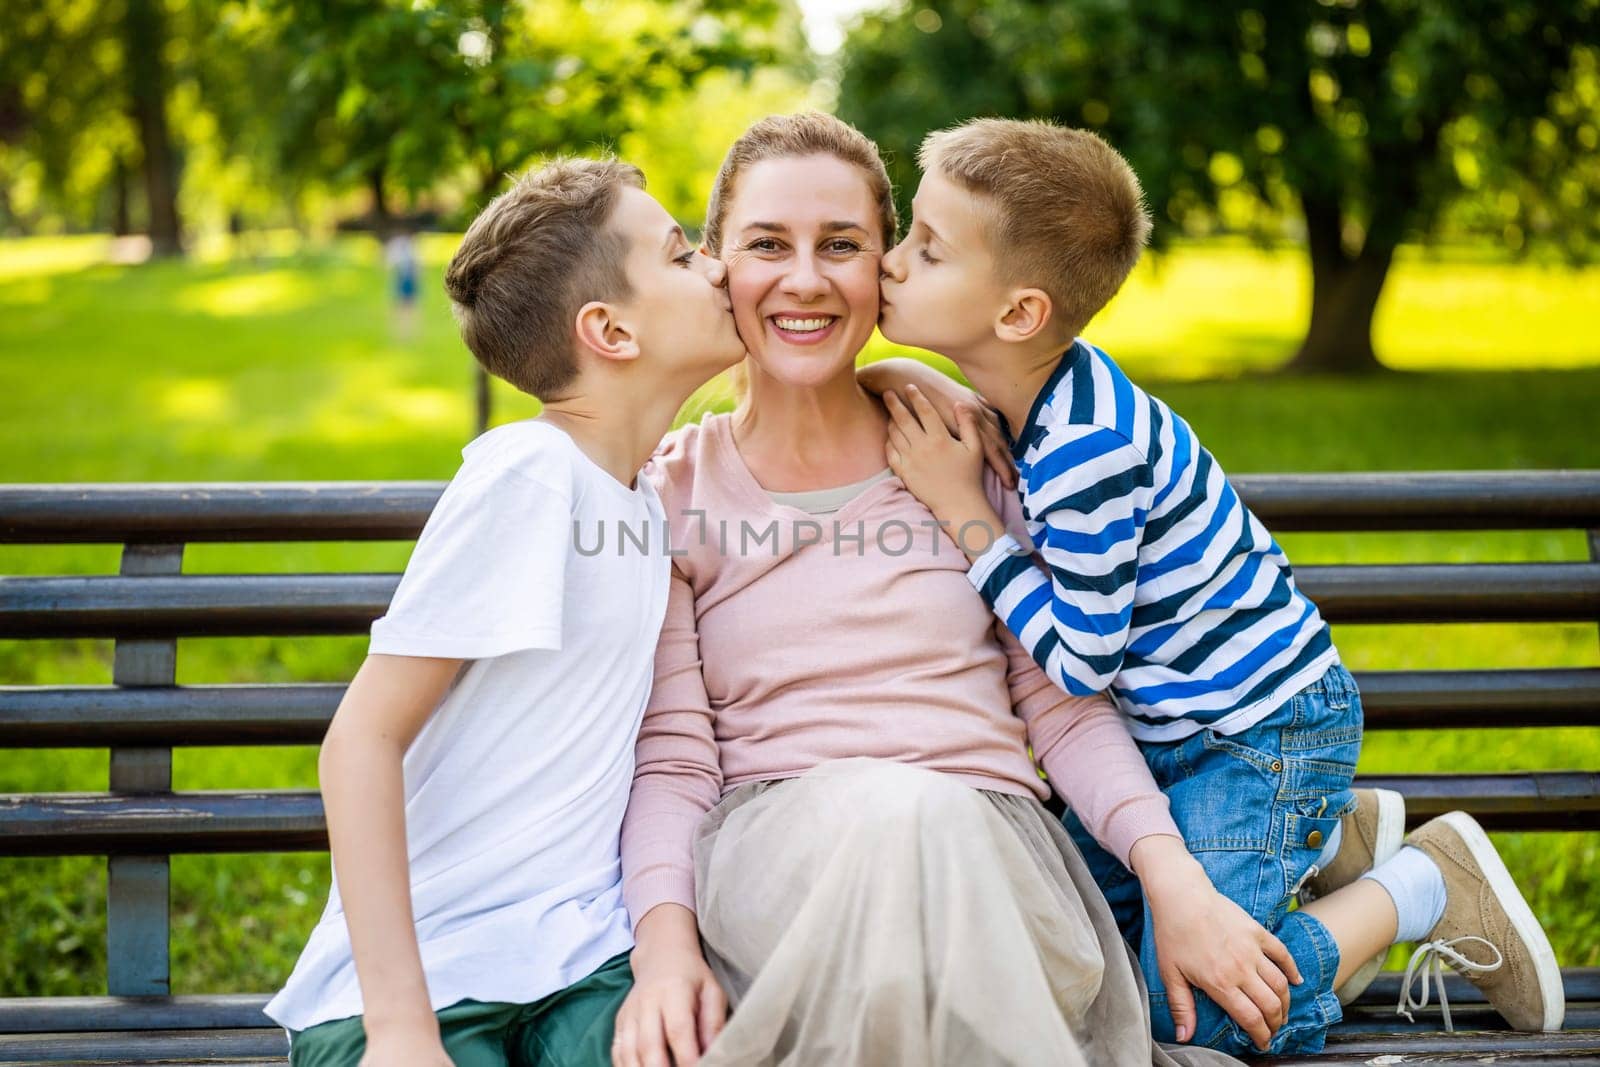 Happy mother is sitting with her sons on bench in park. They are having fun together. Boys are kissing their mother.